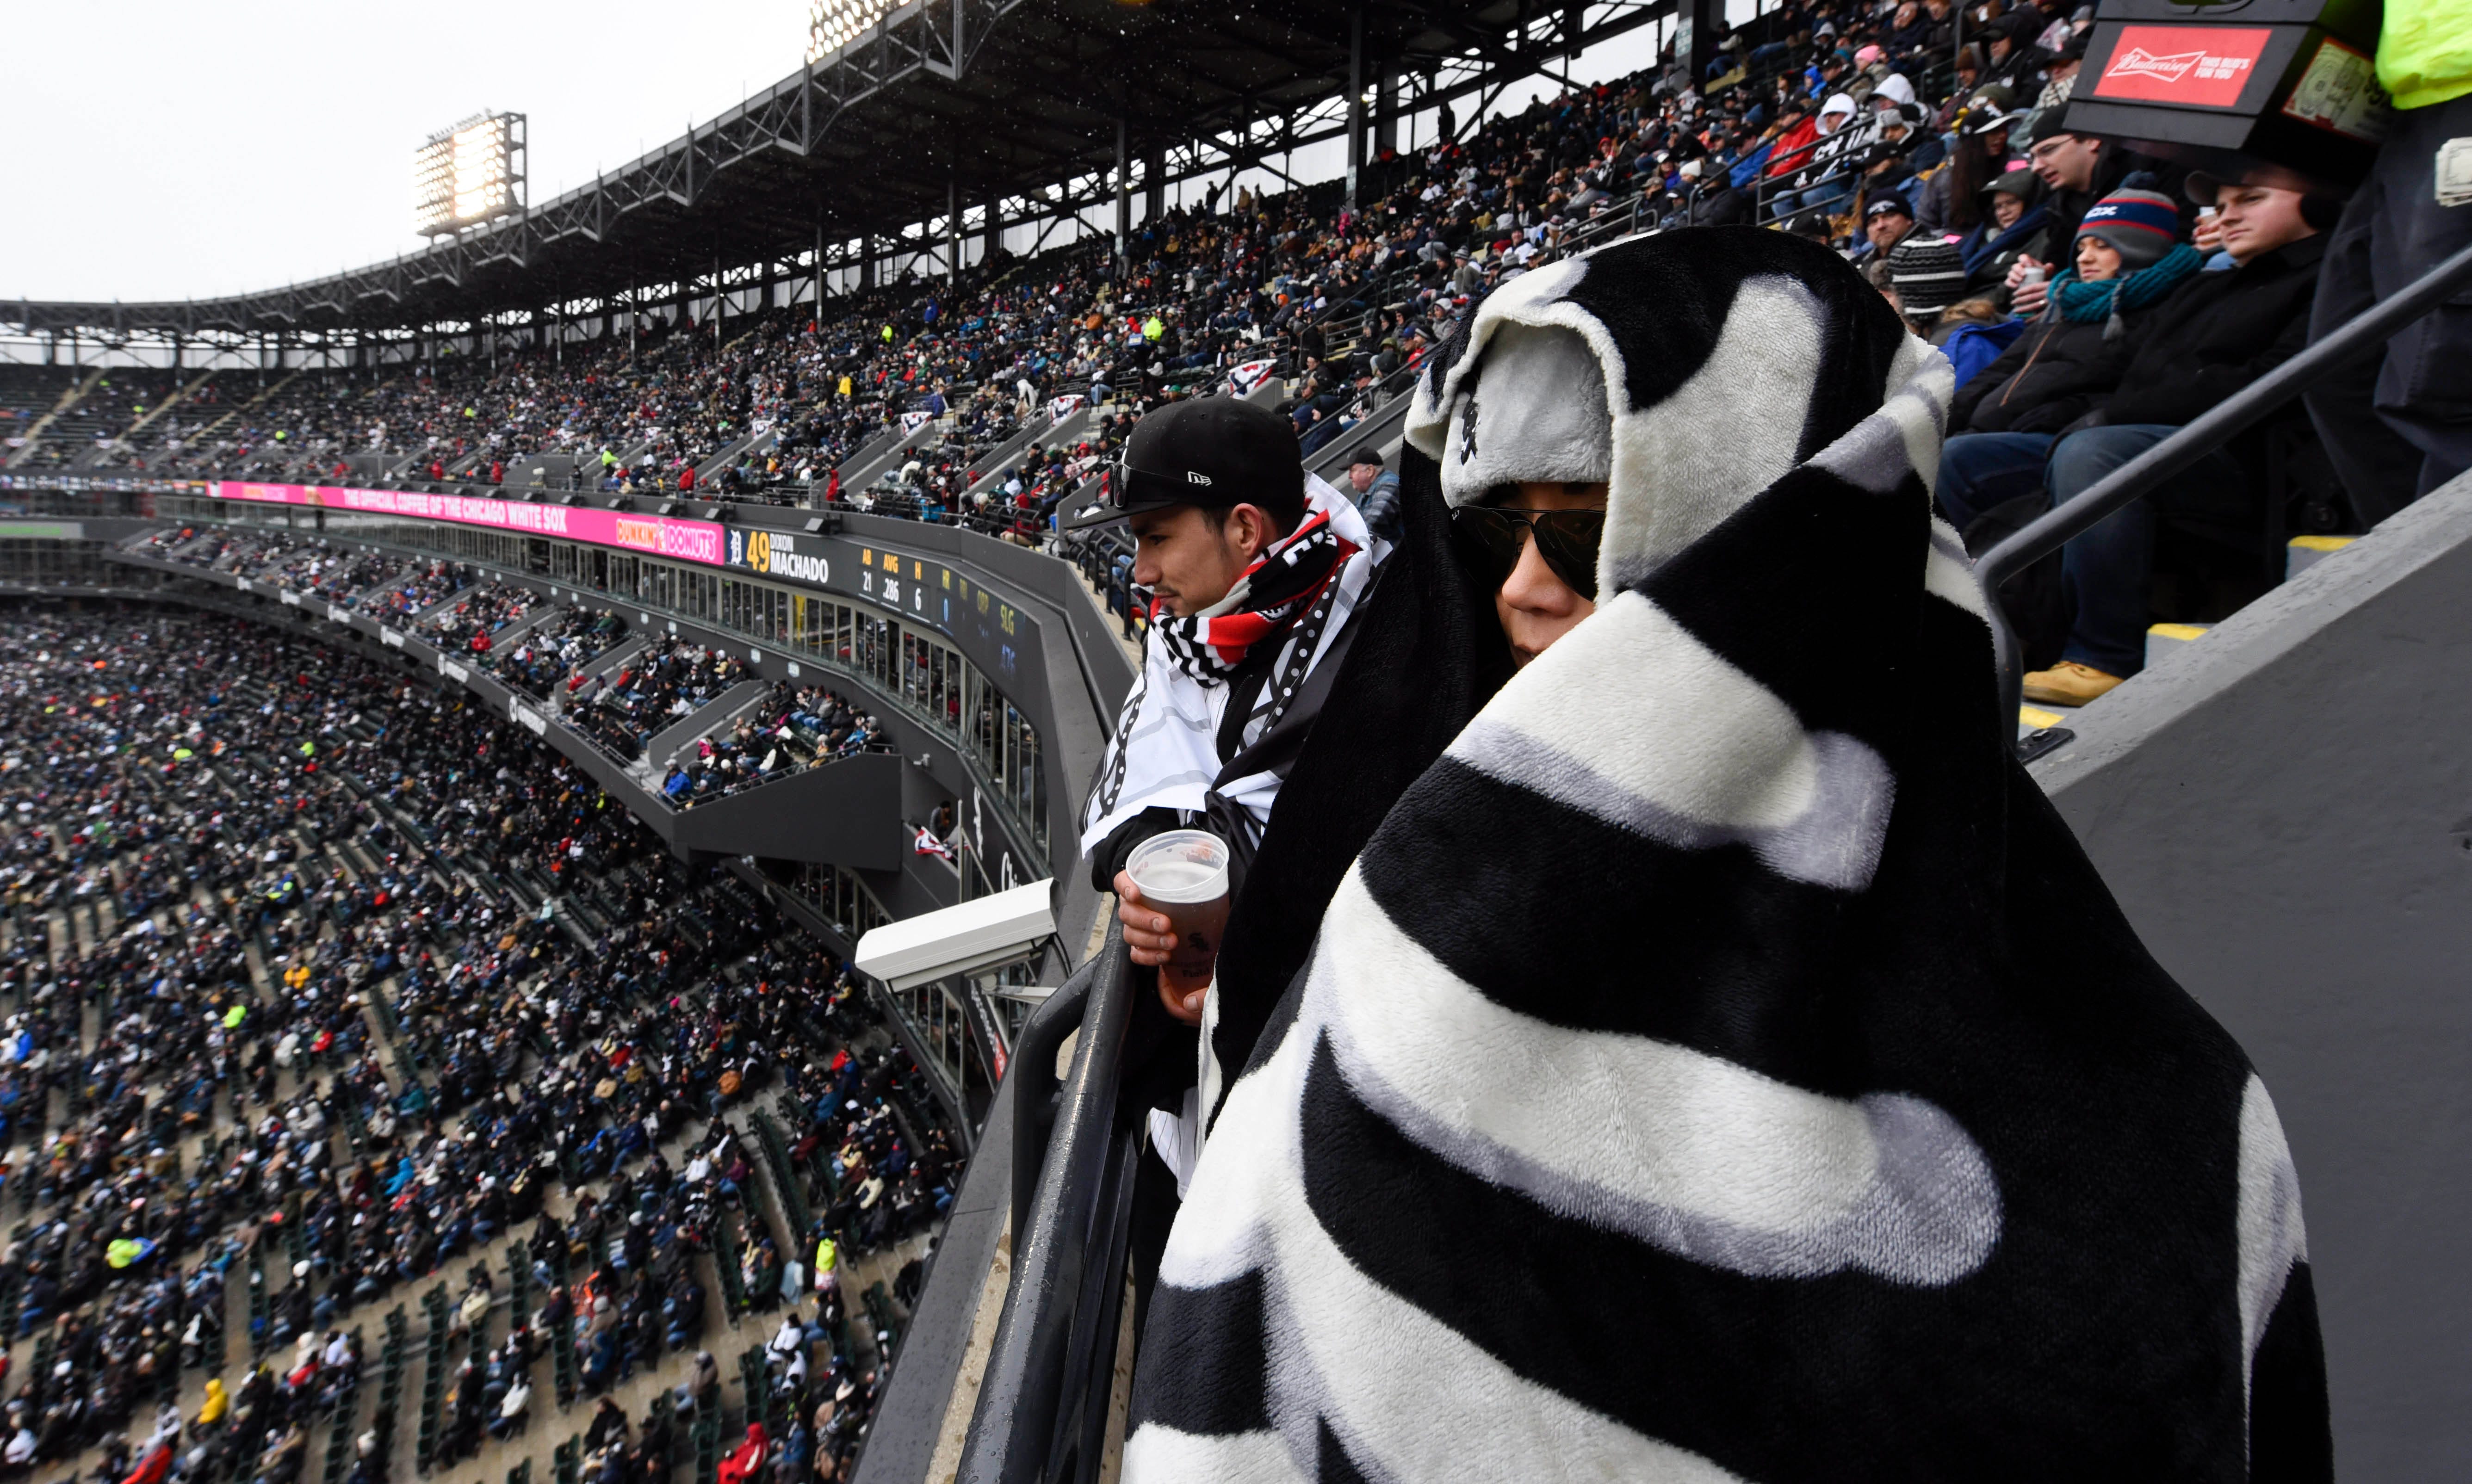 Fans wrapped in blankets at Guaranteed Rate Field for the opening game between the Chicago White Sox and the Detroit Tigers in Chicago.